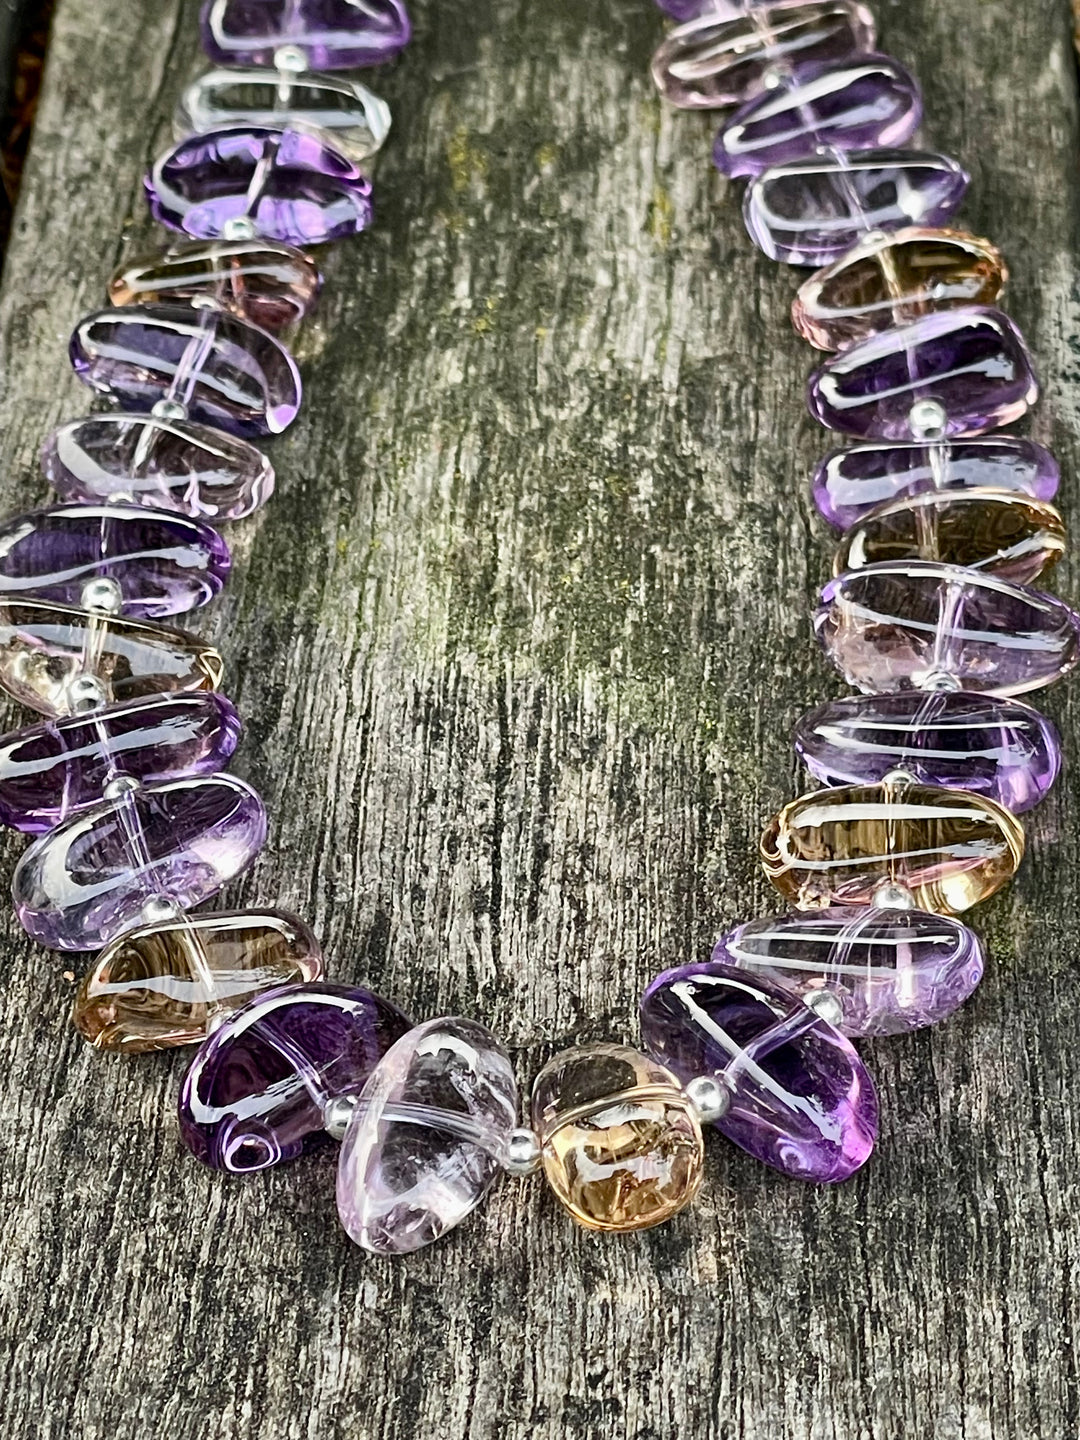 Amethyst and Citrine Necklace